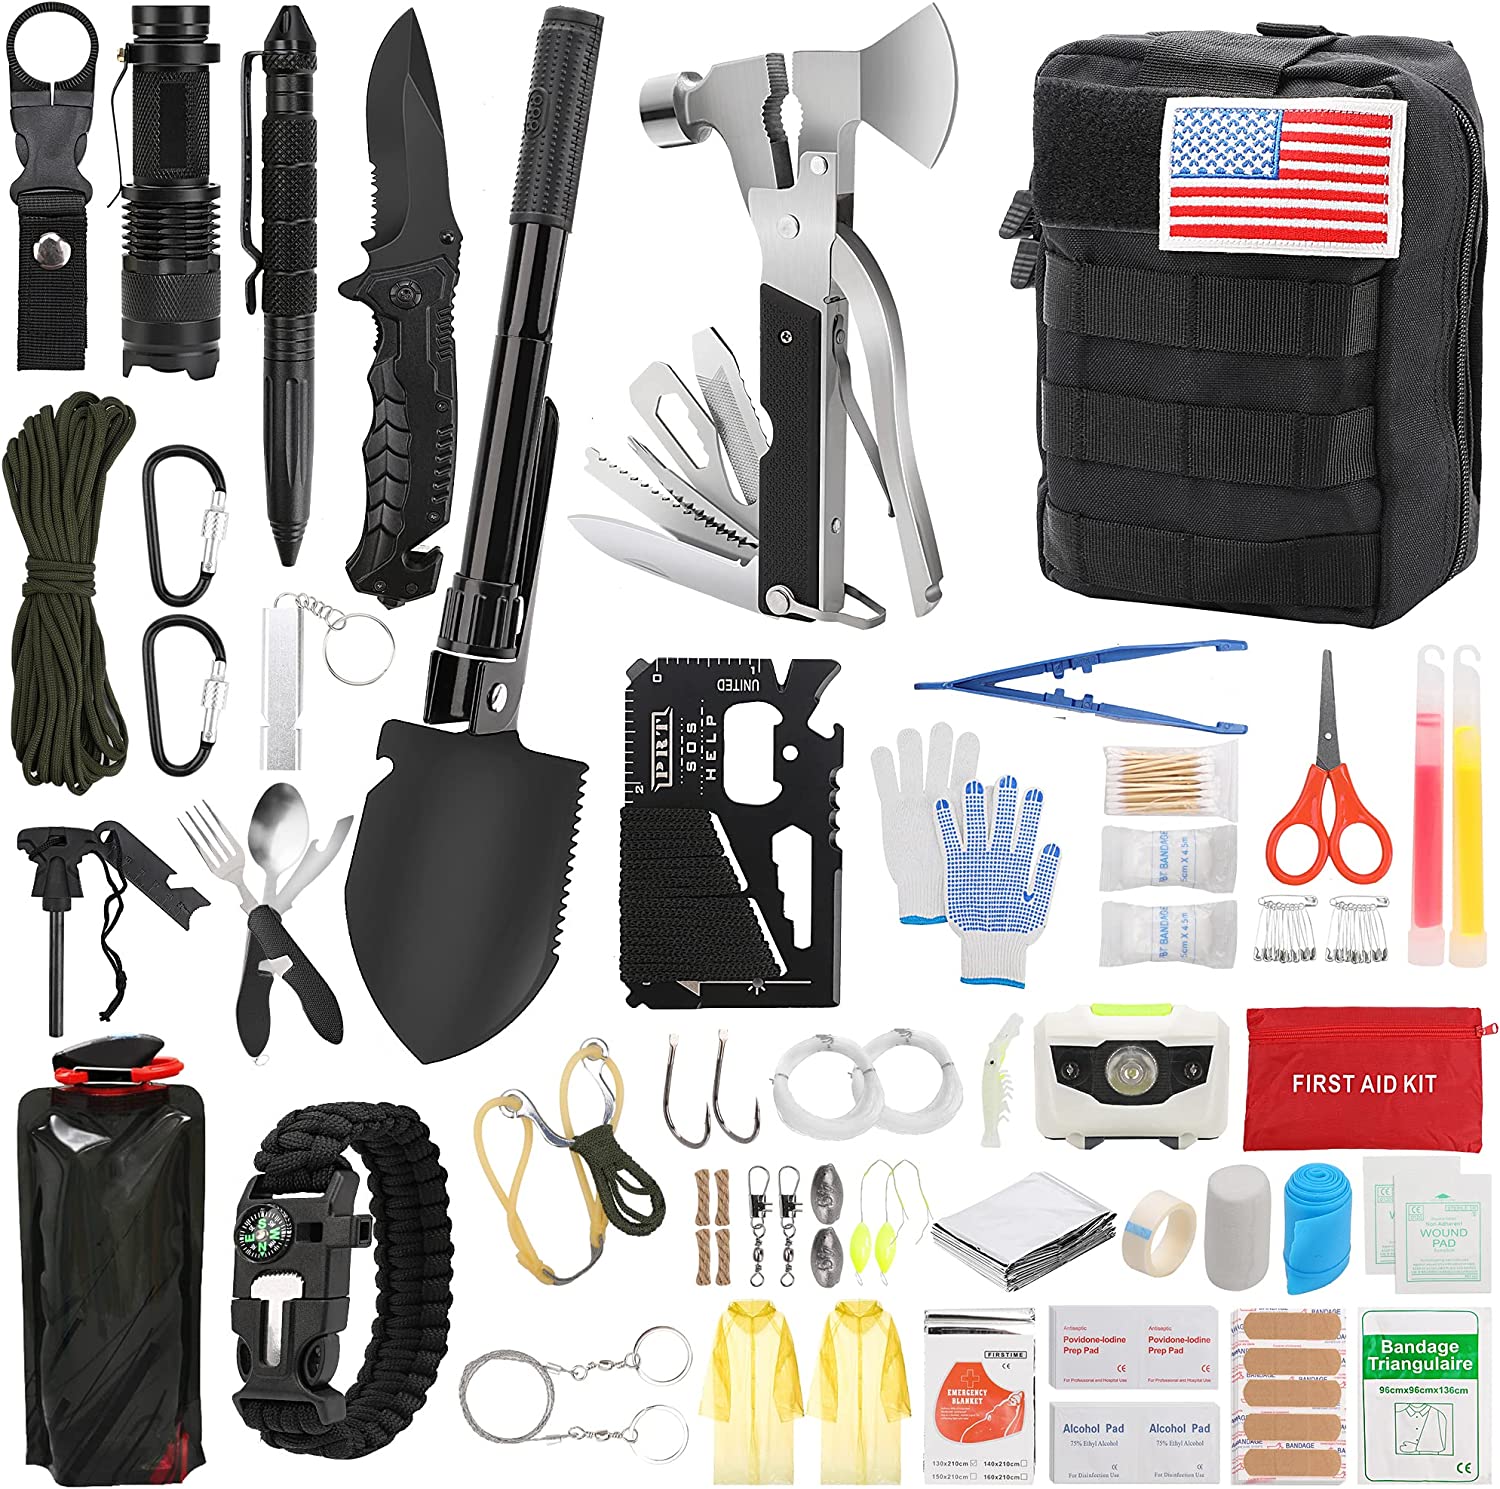 Emergency Survival Kit and First Aid Kit 182 Pcs Gear Tool Tactical First Aid Kit Trauma Bag with Molle Pouch for Camping Hiking Outdoor Adventure